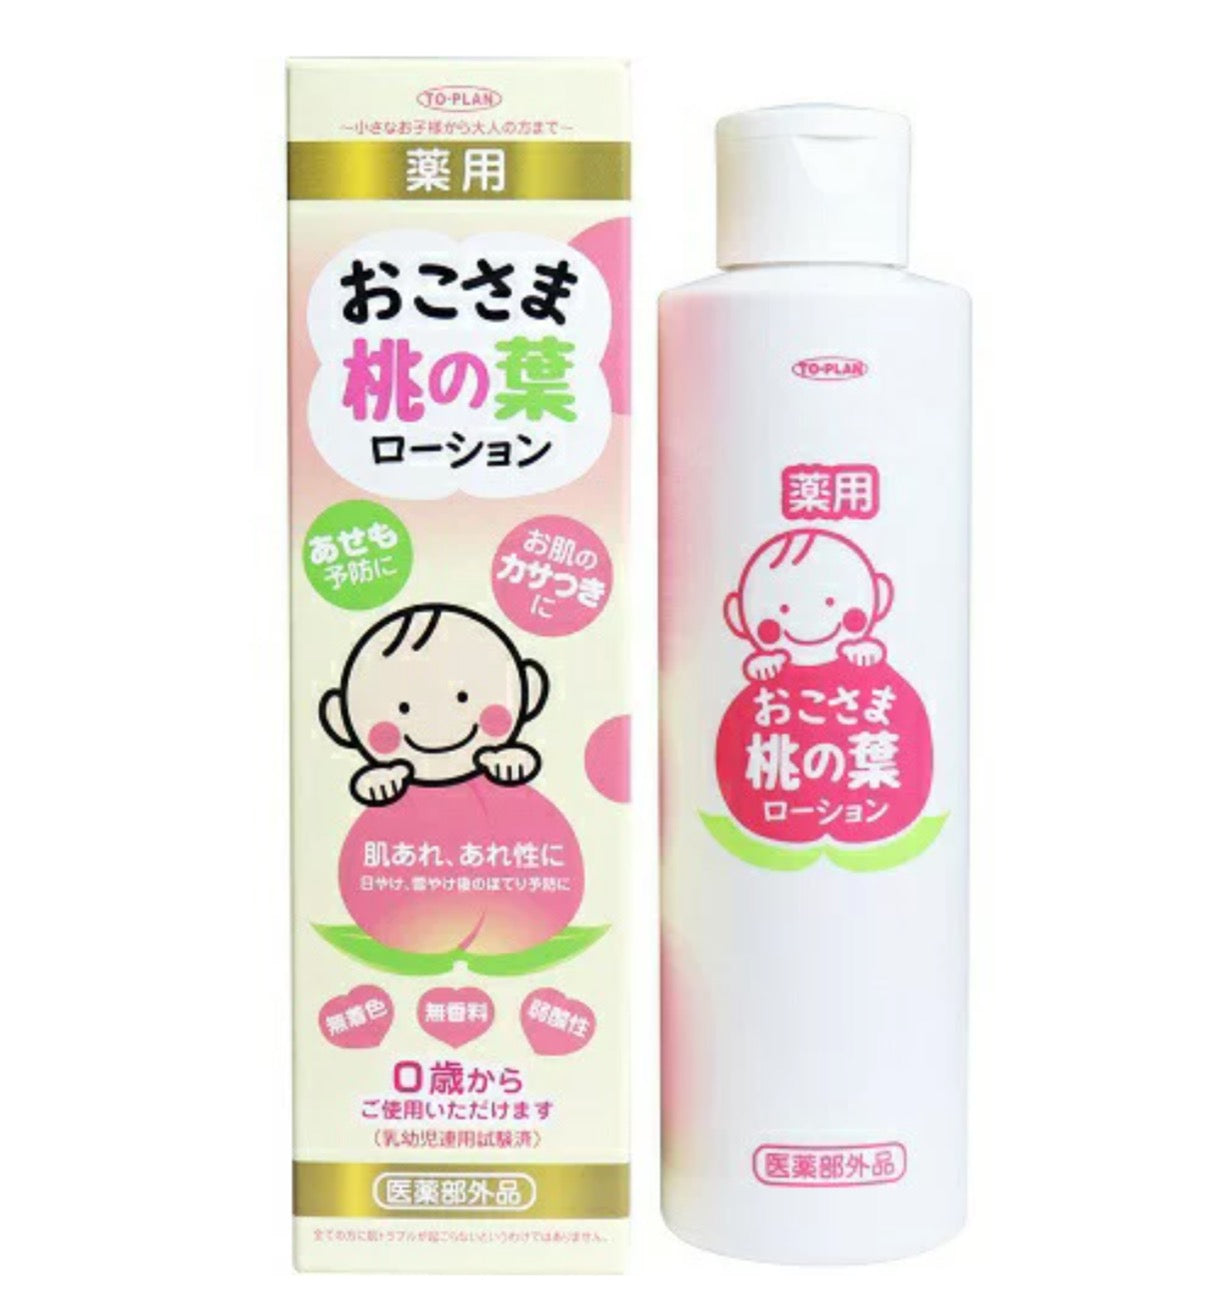 TO-PLAN PEACH LEAF LOTION FOR KIDS 200ML